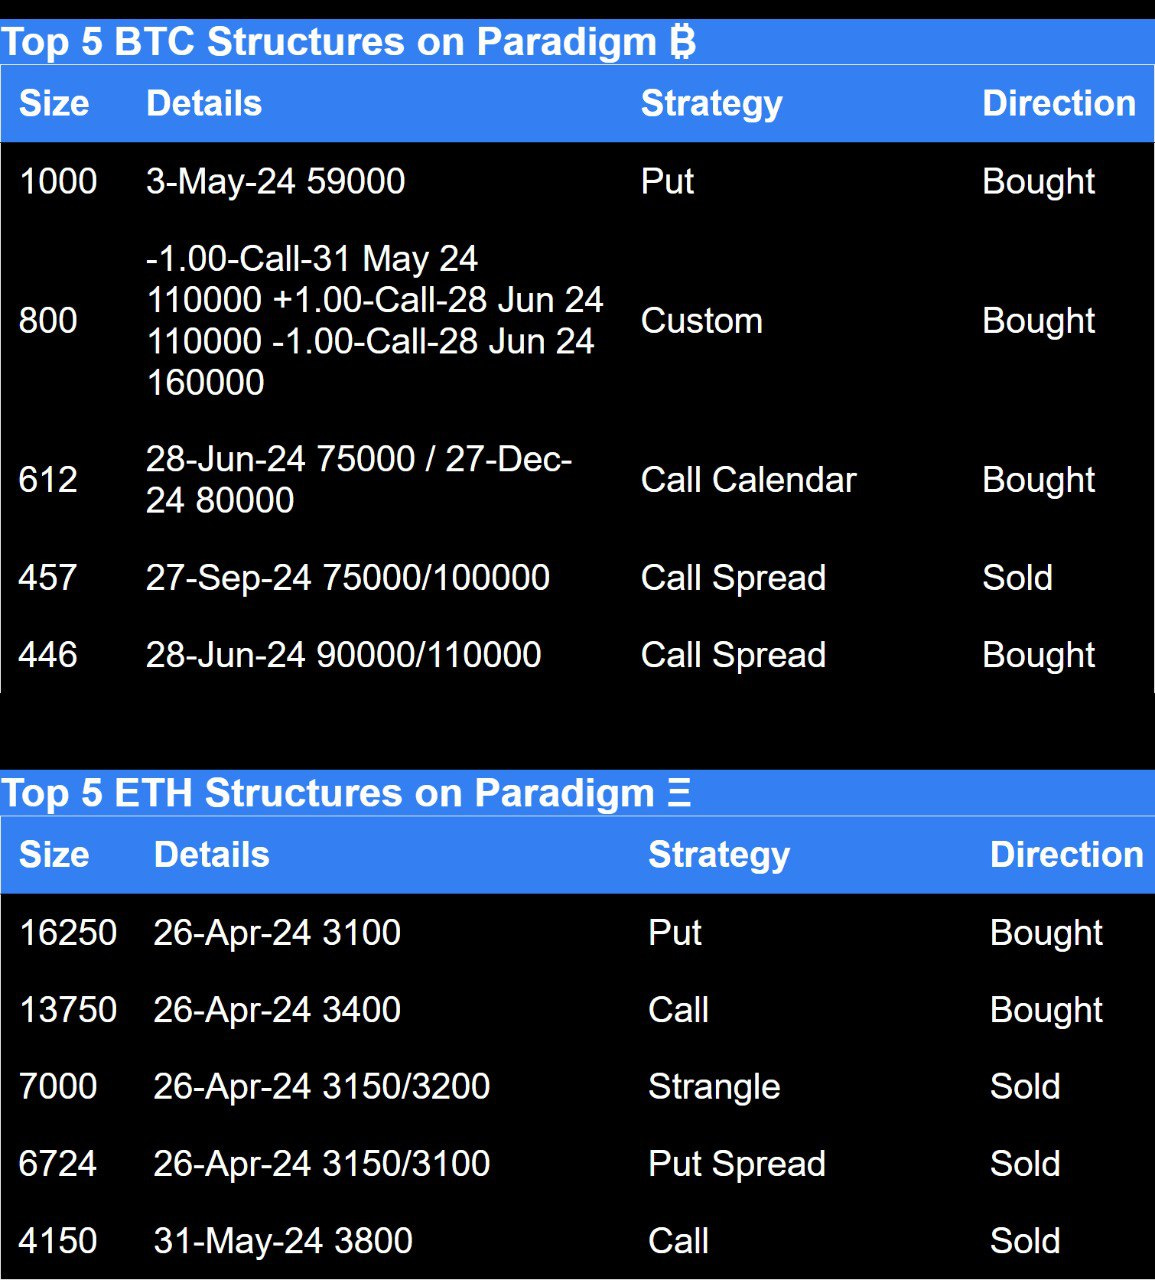 Paradigm top 5 BTC structures and top 5 ETH structures 